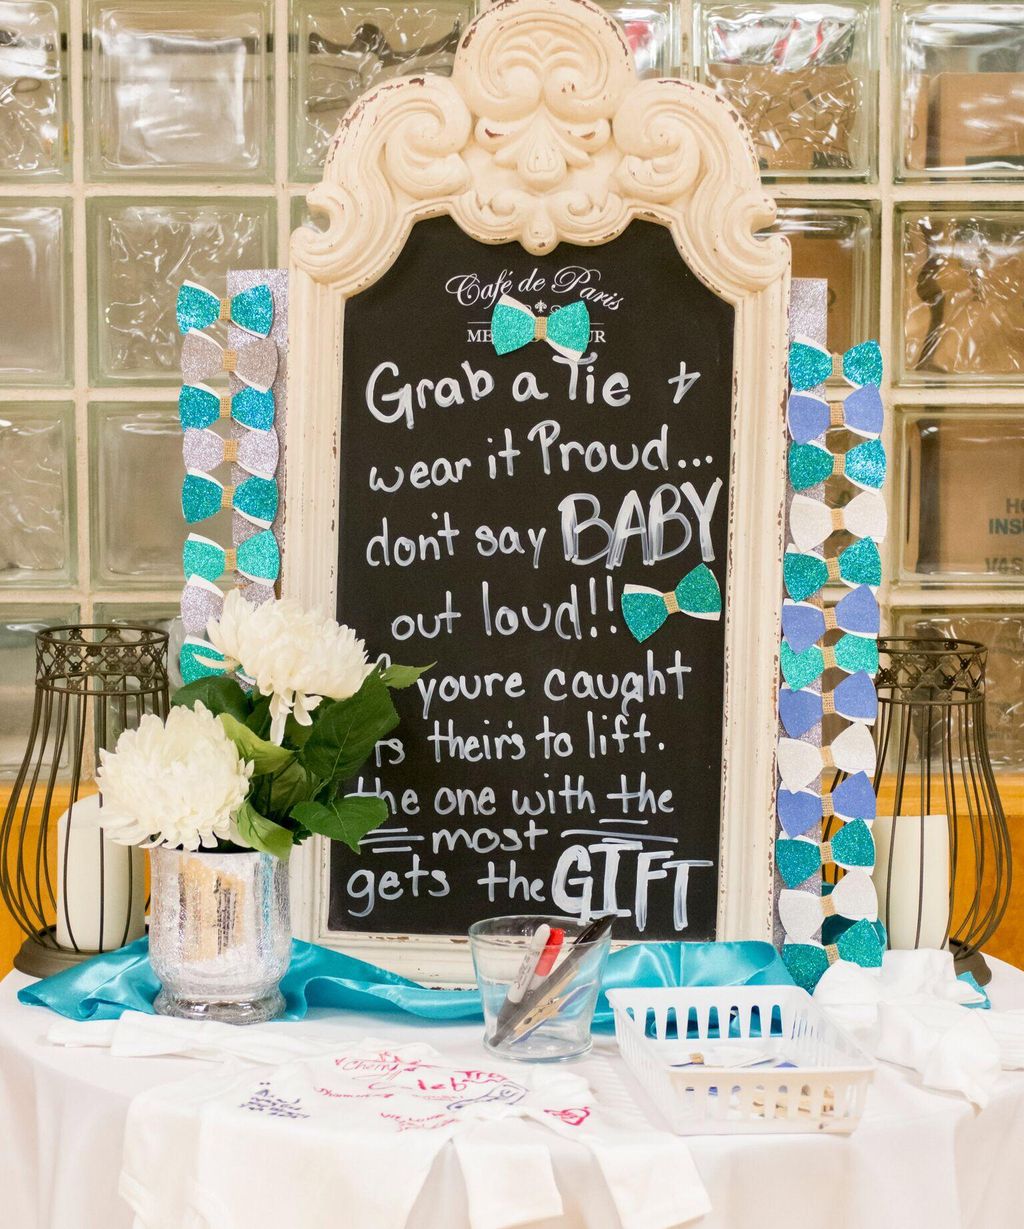 A Mother's Touch Event Decor